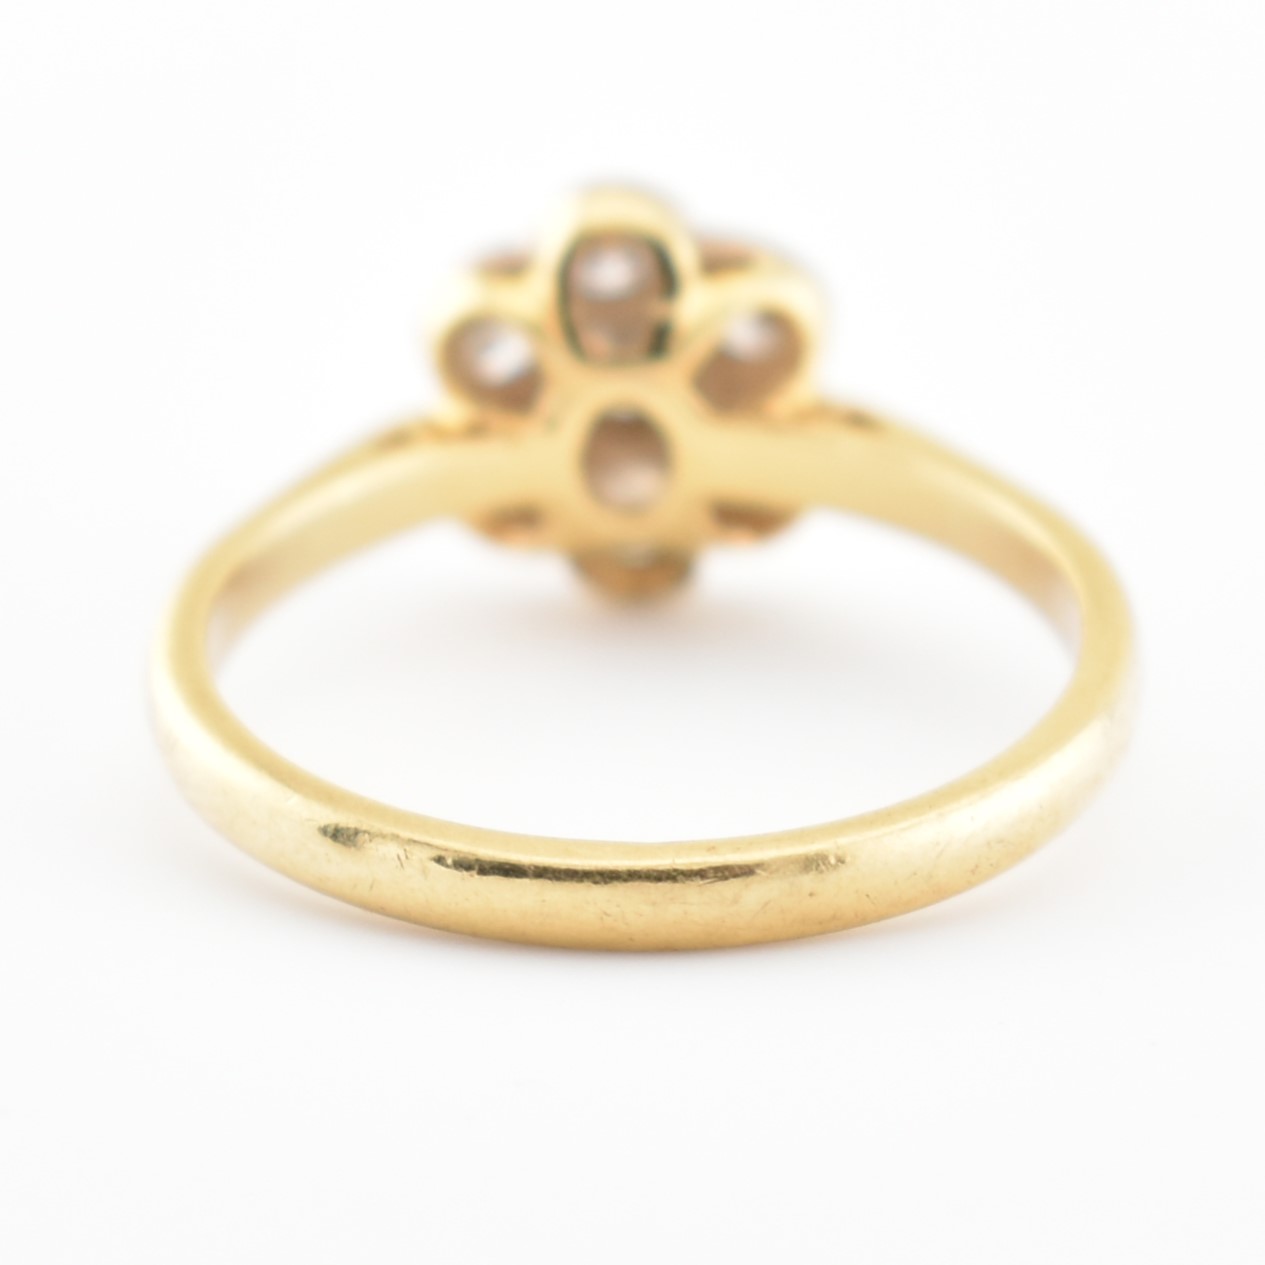 HALLMARKED 18CT GOLD & DIAMOND CLUSTER RING - Image 6 of 6